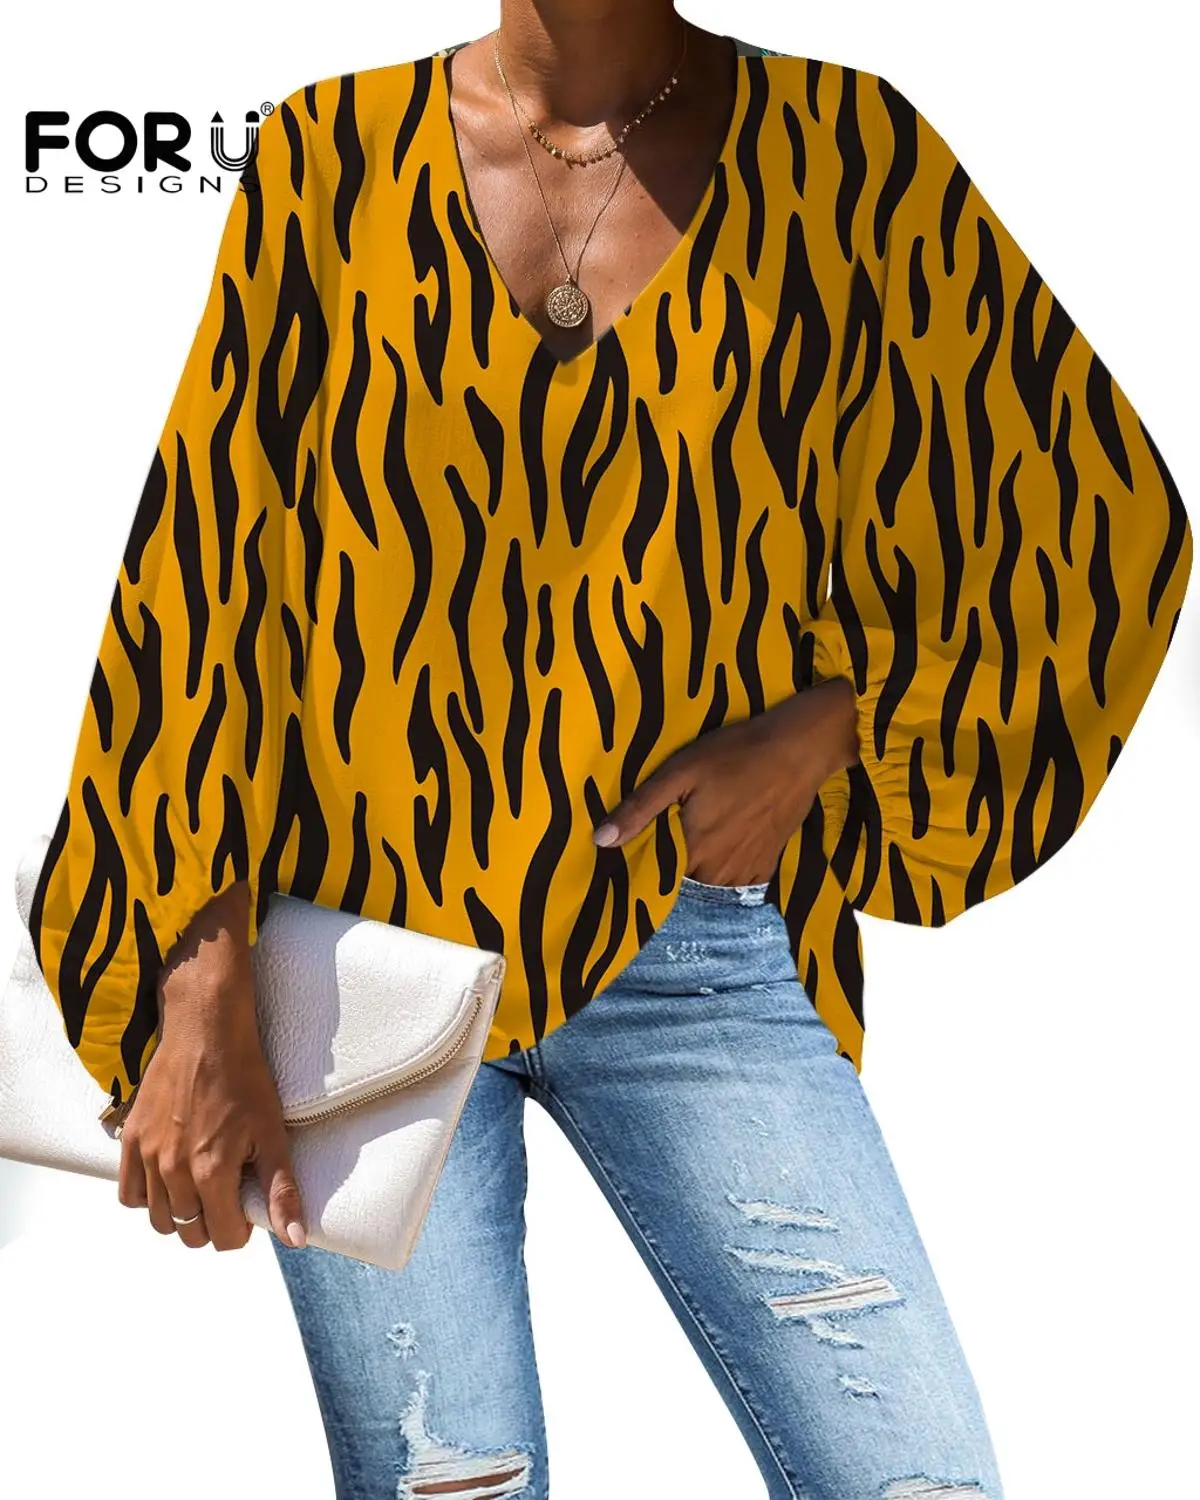 

FORUDESIGNS Casual Chiffon Blouse For Ladies Line Art Design Pattern Long-sleeve Sheer Shirts Simple Vogue Streetwear Match Jean